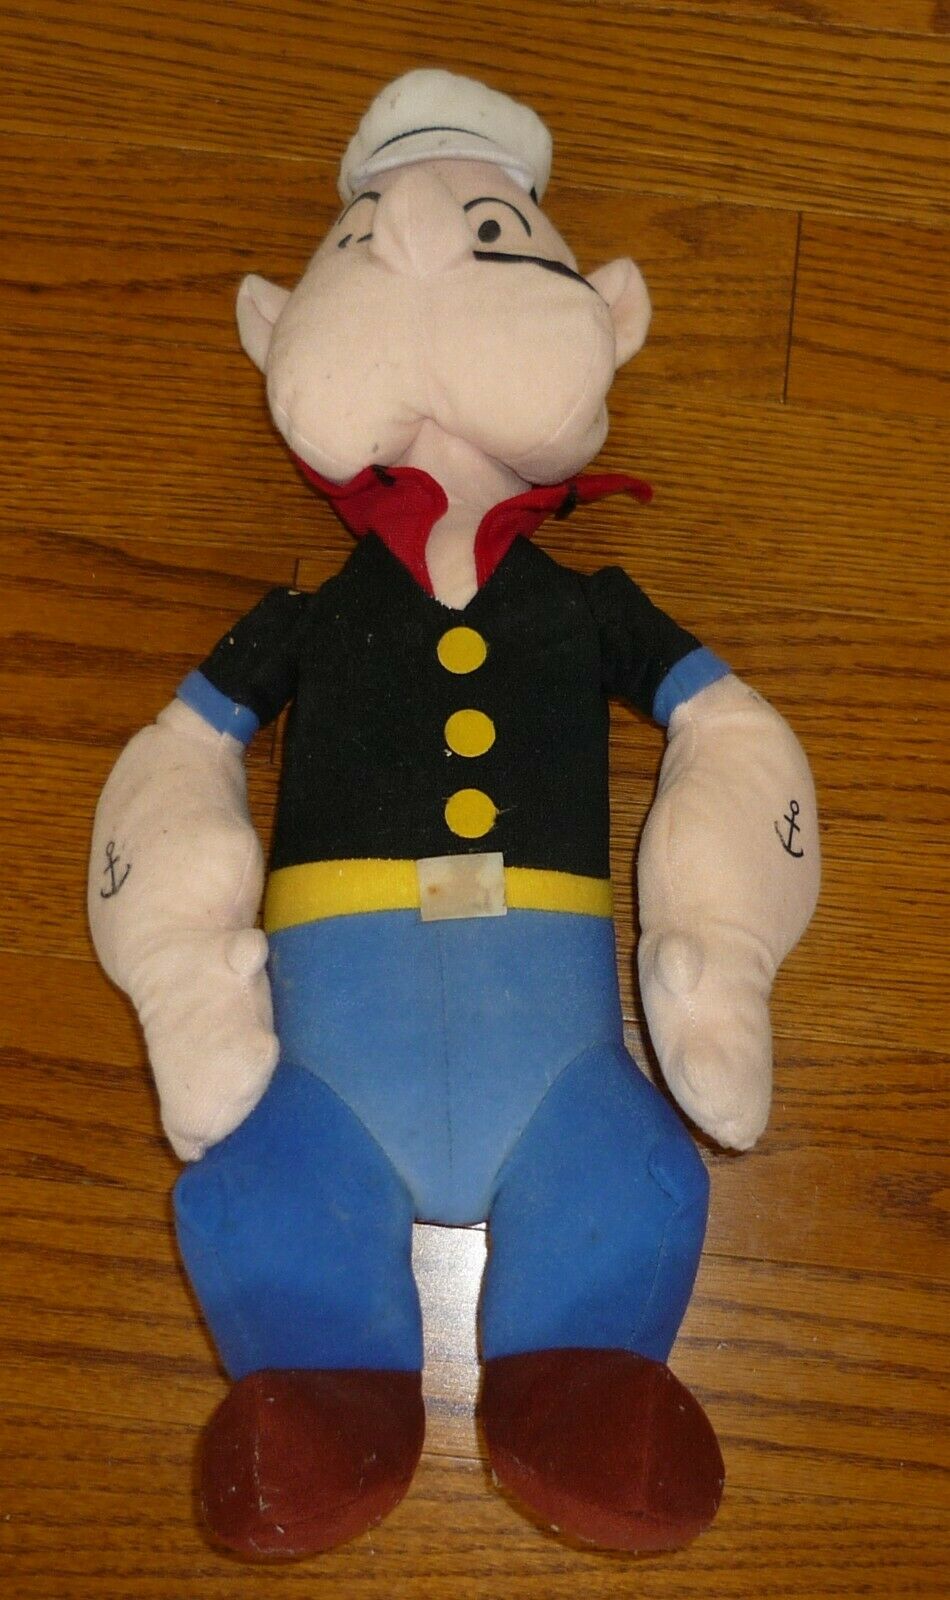 19 inches tall Popeye stuffed doll, 1992 Play-By-Play Toys, Popeye The Sailor